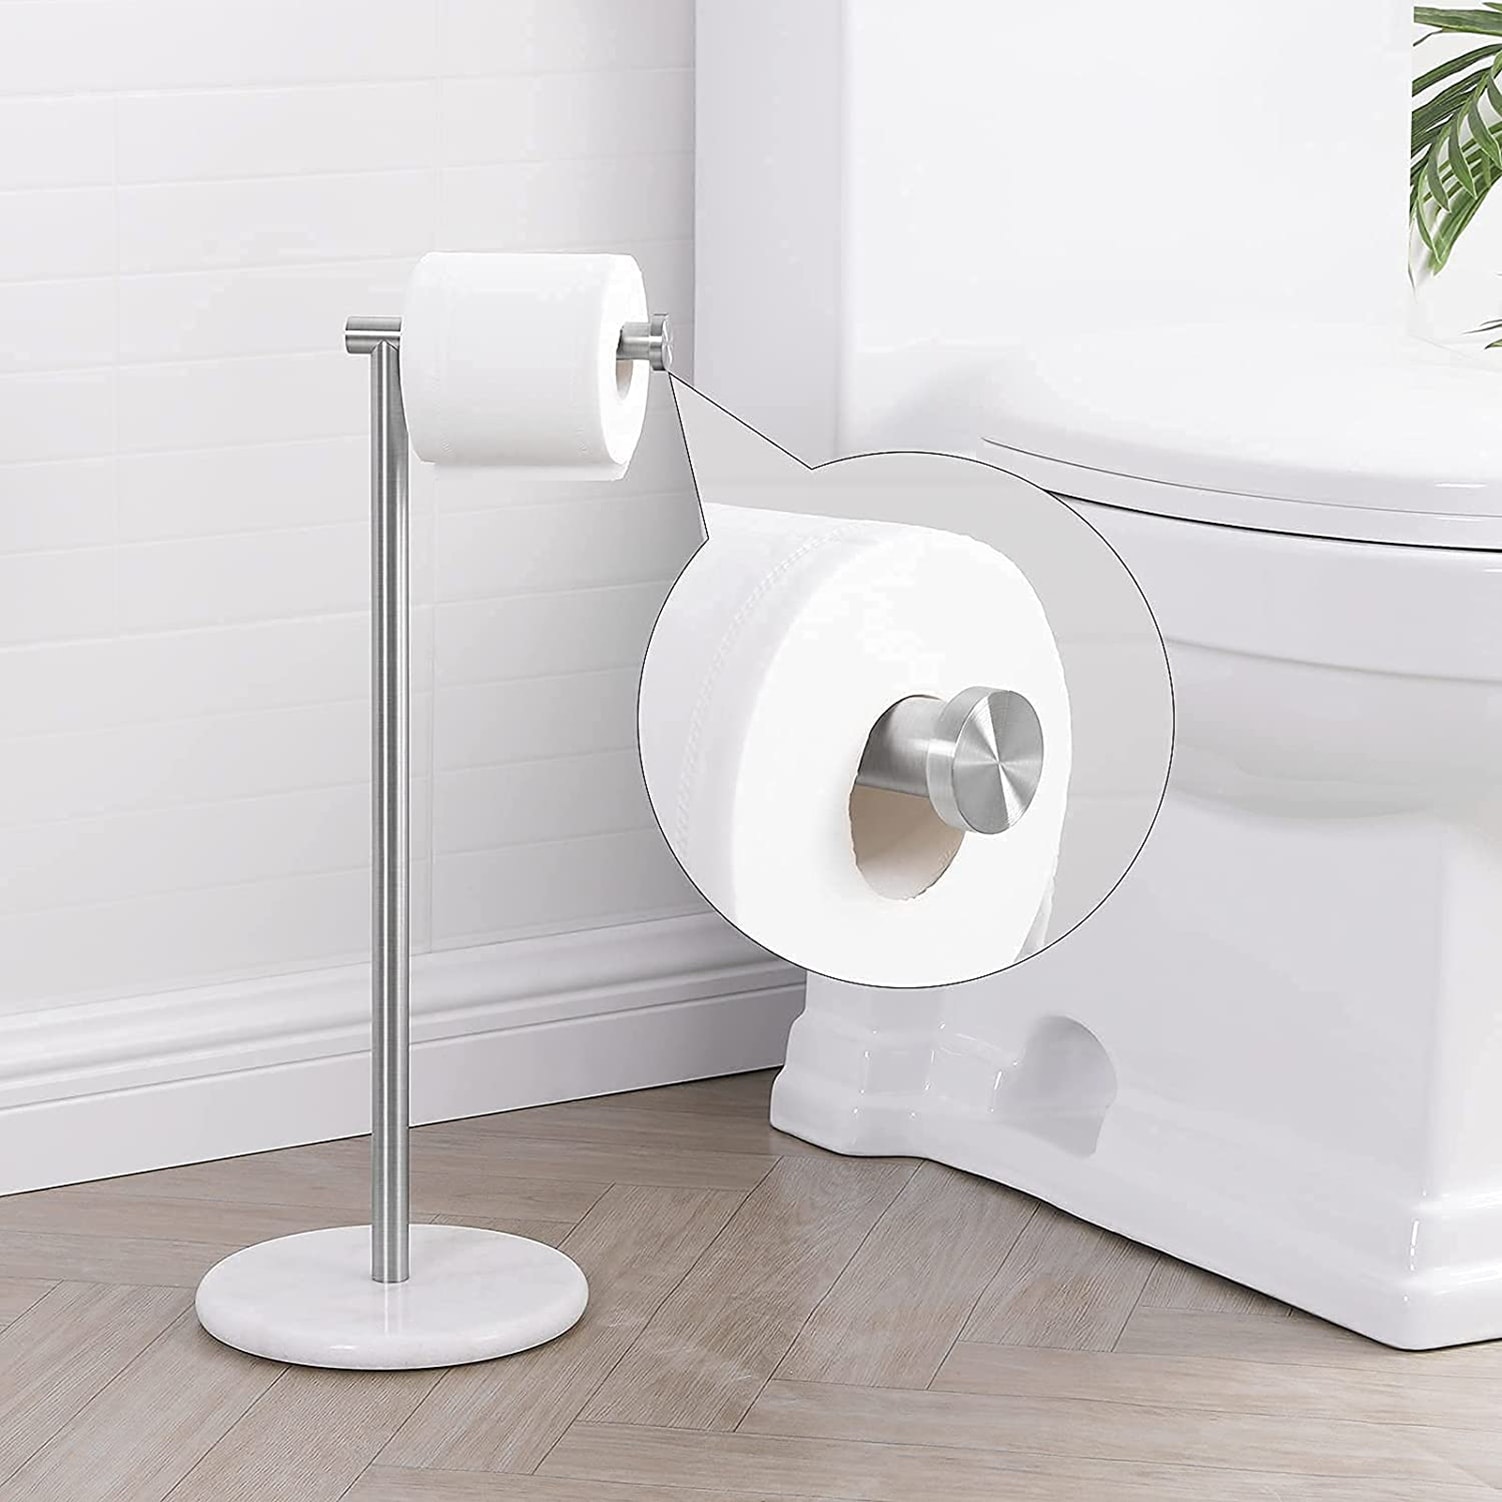 https://ak1.ostkcdn.com/images/products/is/images/direct/5a967a8aa3e5f735d1917fcf8c5a2f1648b7b8e7/Freestanding-Toilet-Paper-Holder-With-Natural-Marble-Base.jpg